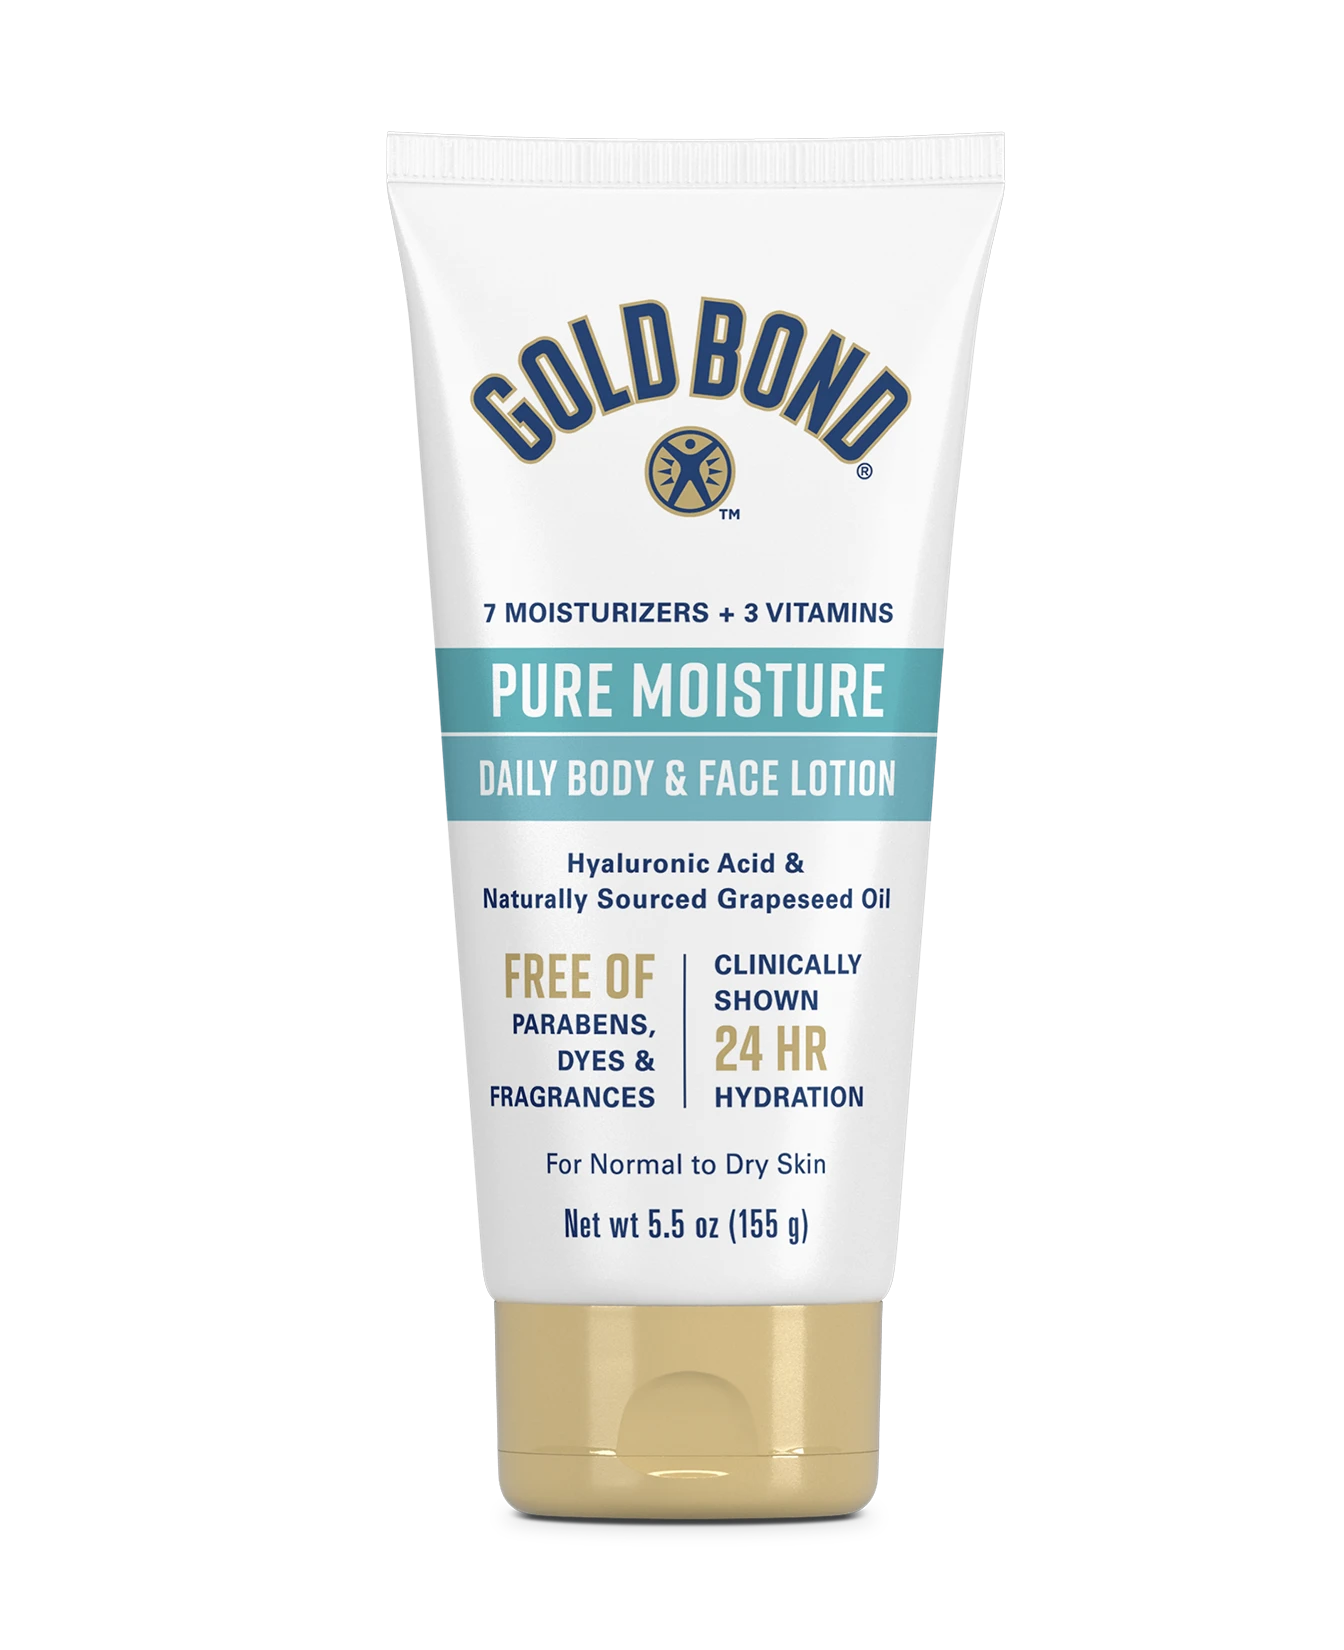 Pure Moisture Daily Body & Face Lotion | Gold Bond®